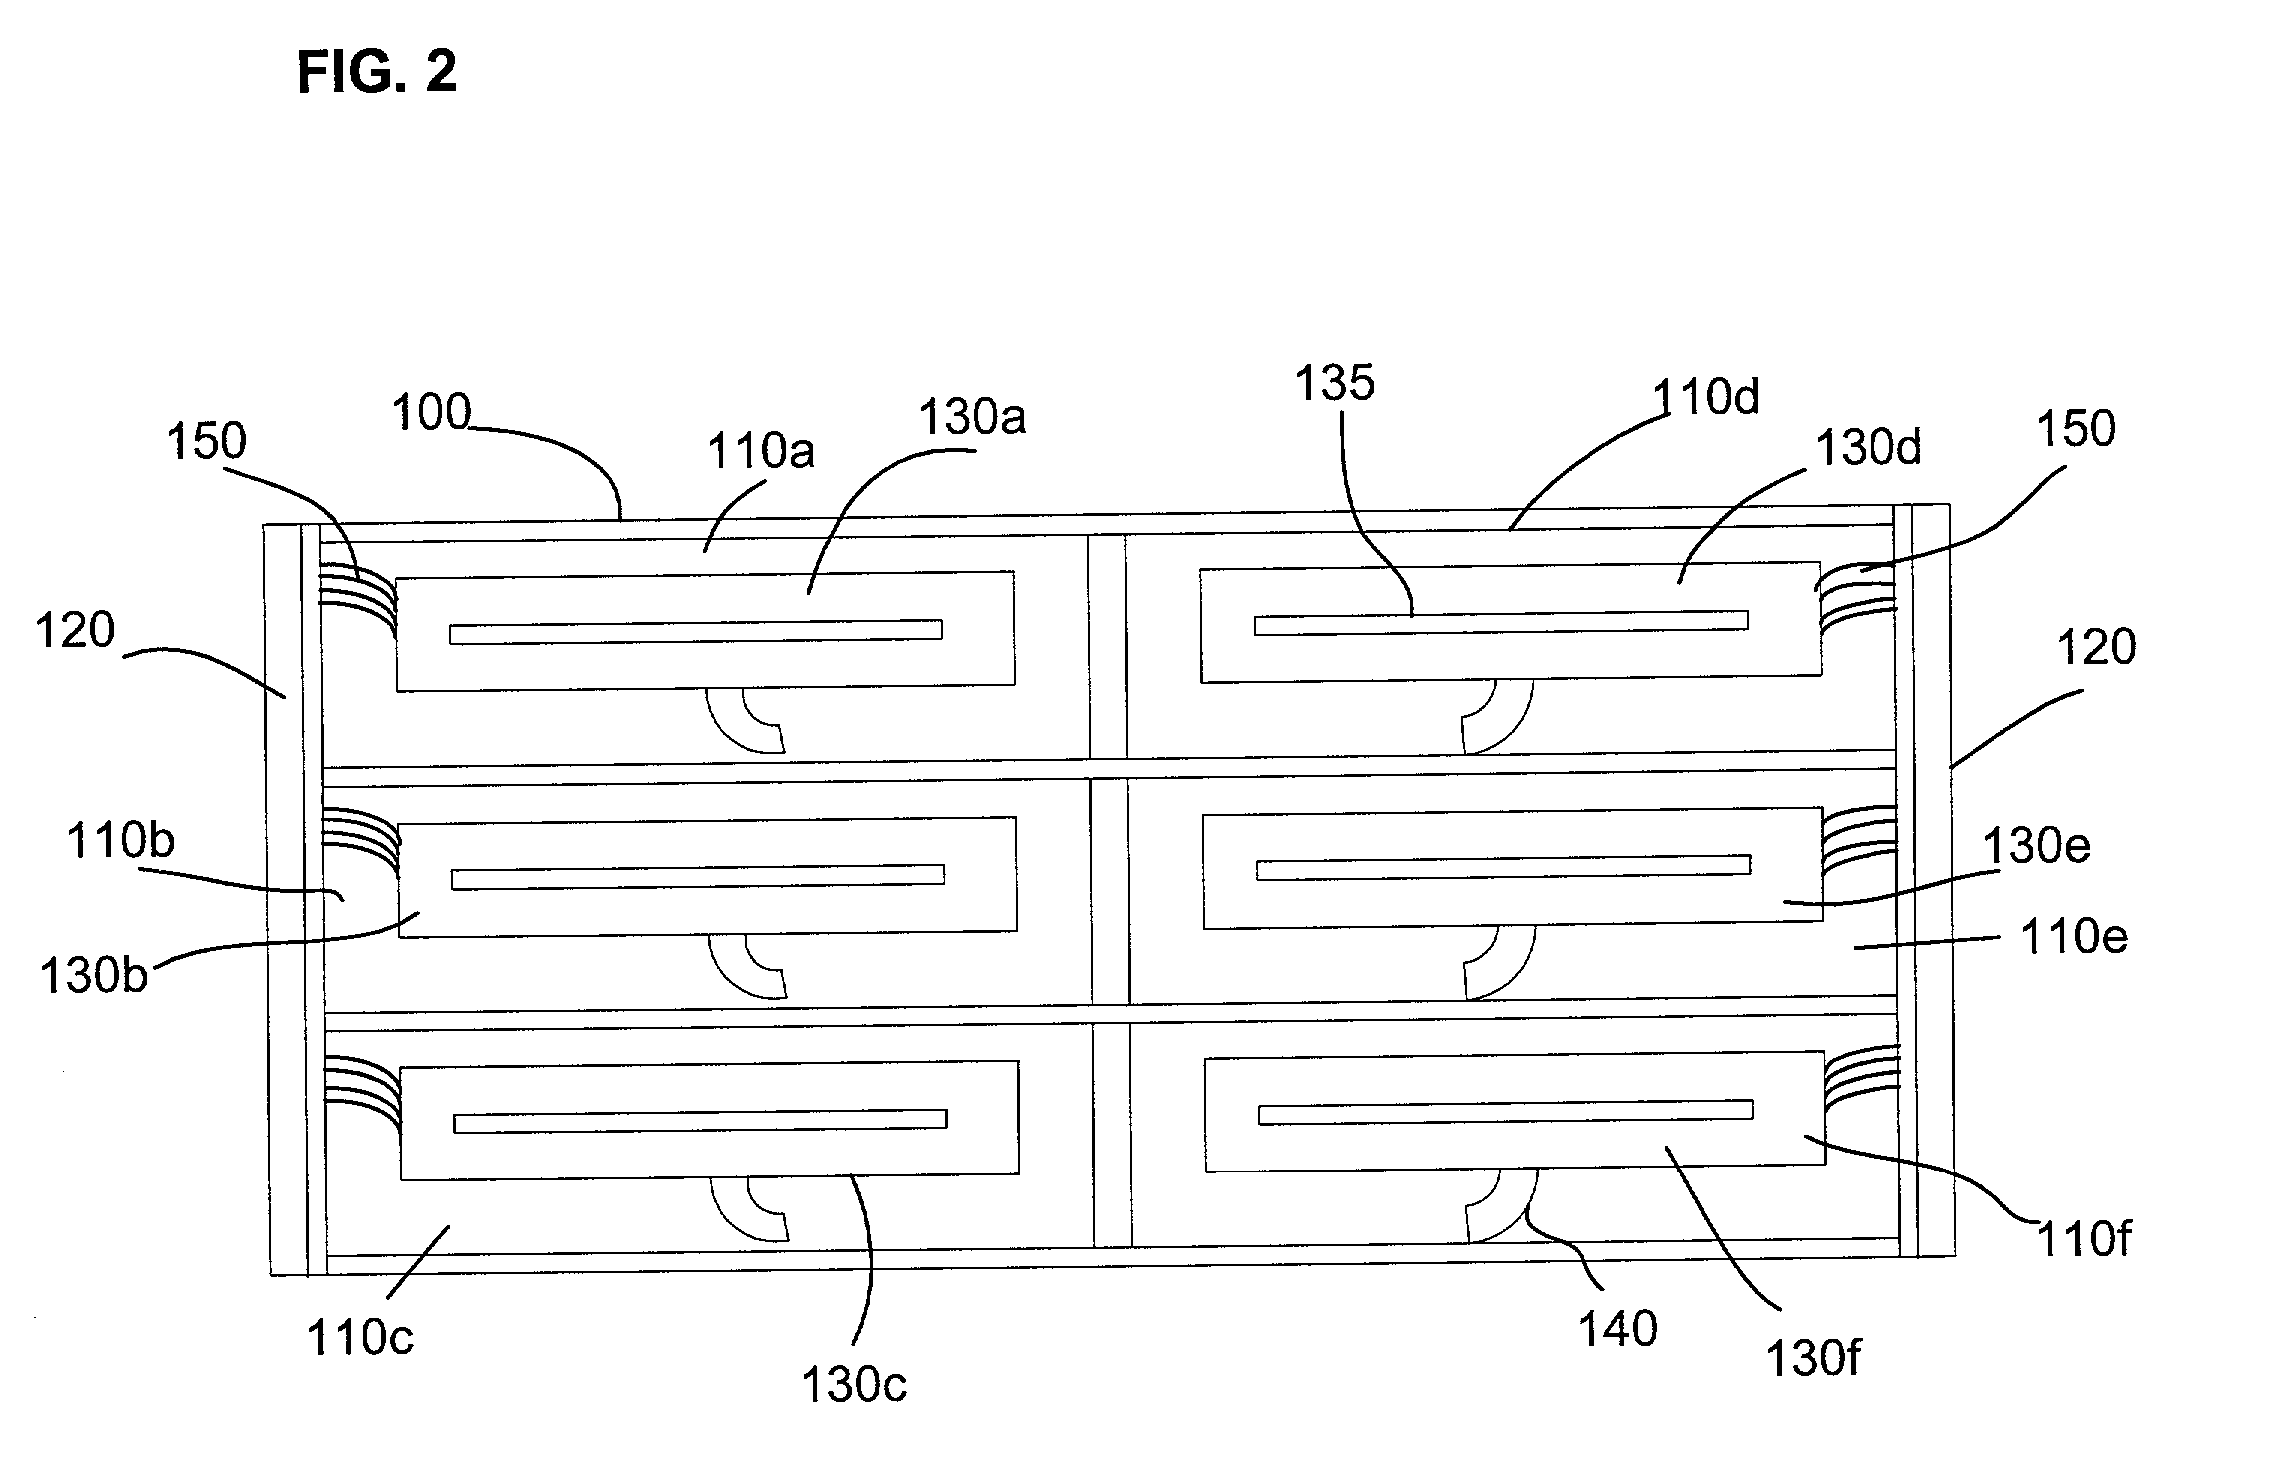 Workpiece distribution and processing in a high throughput stacked frame